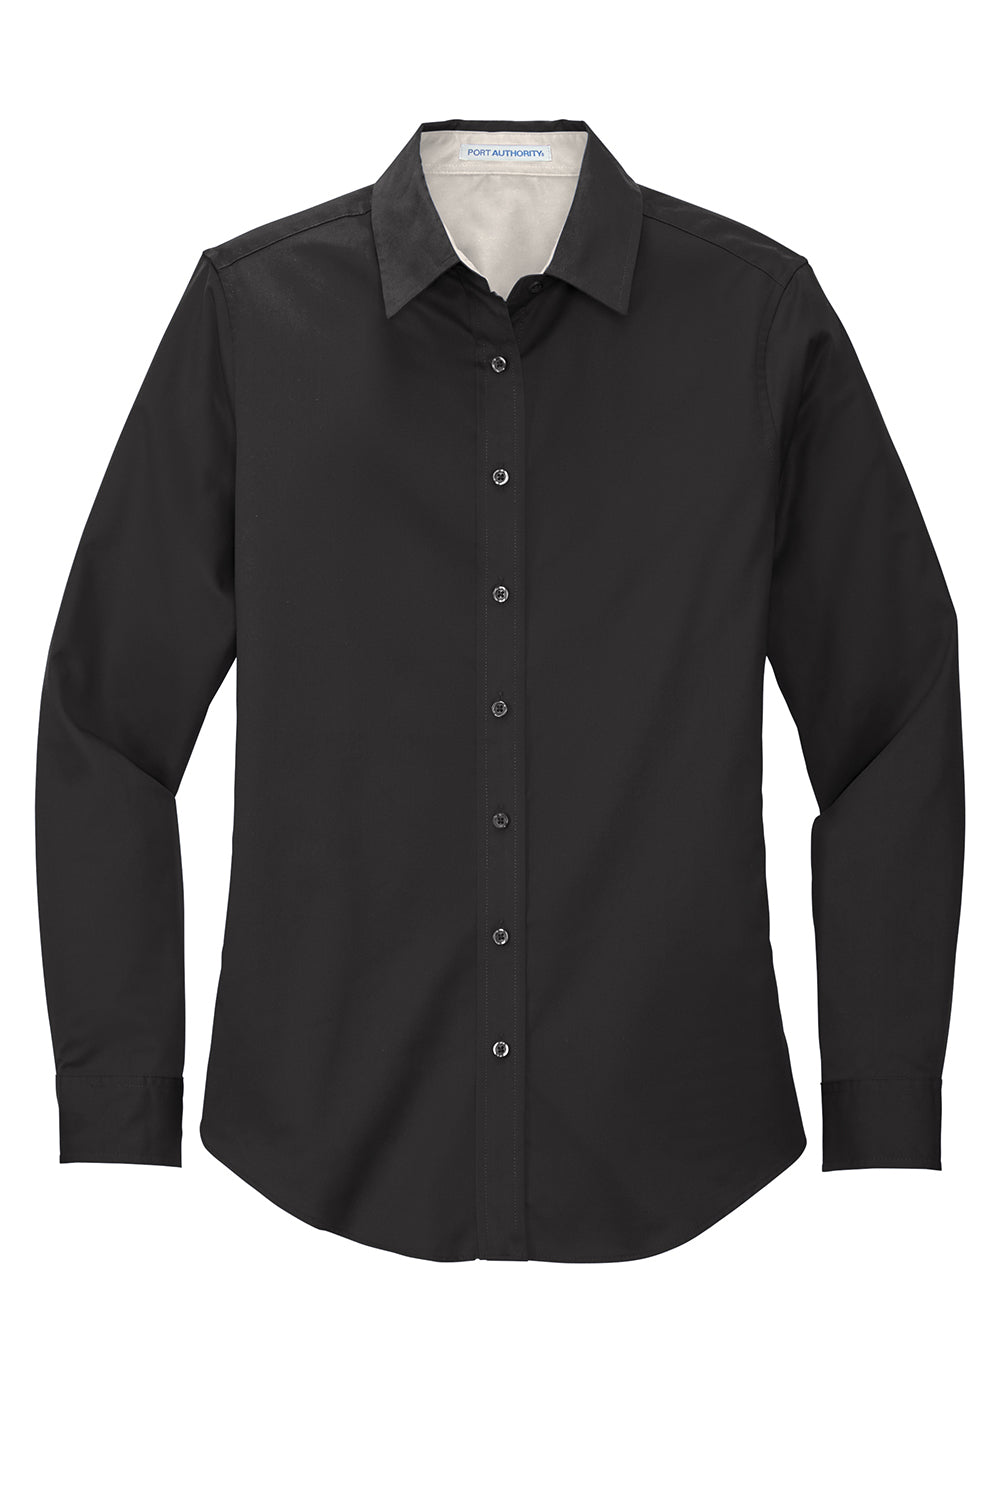 Port Authority L608 Womens Easy Care Wrinkle Resistant Long Sleeve Button Down Shirt Black Flat Front